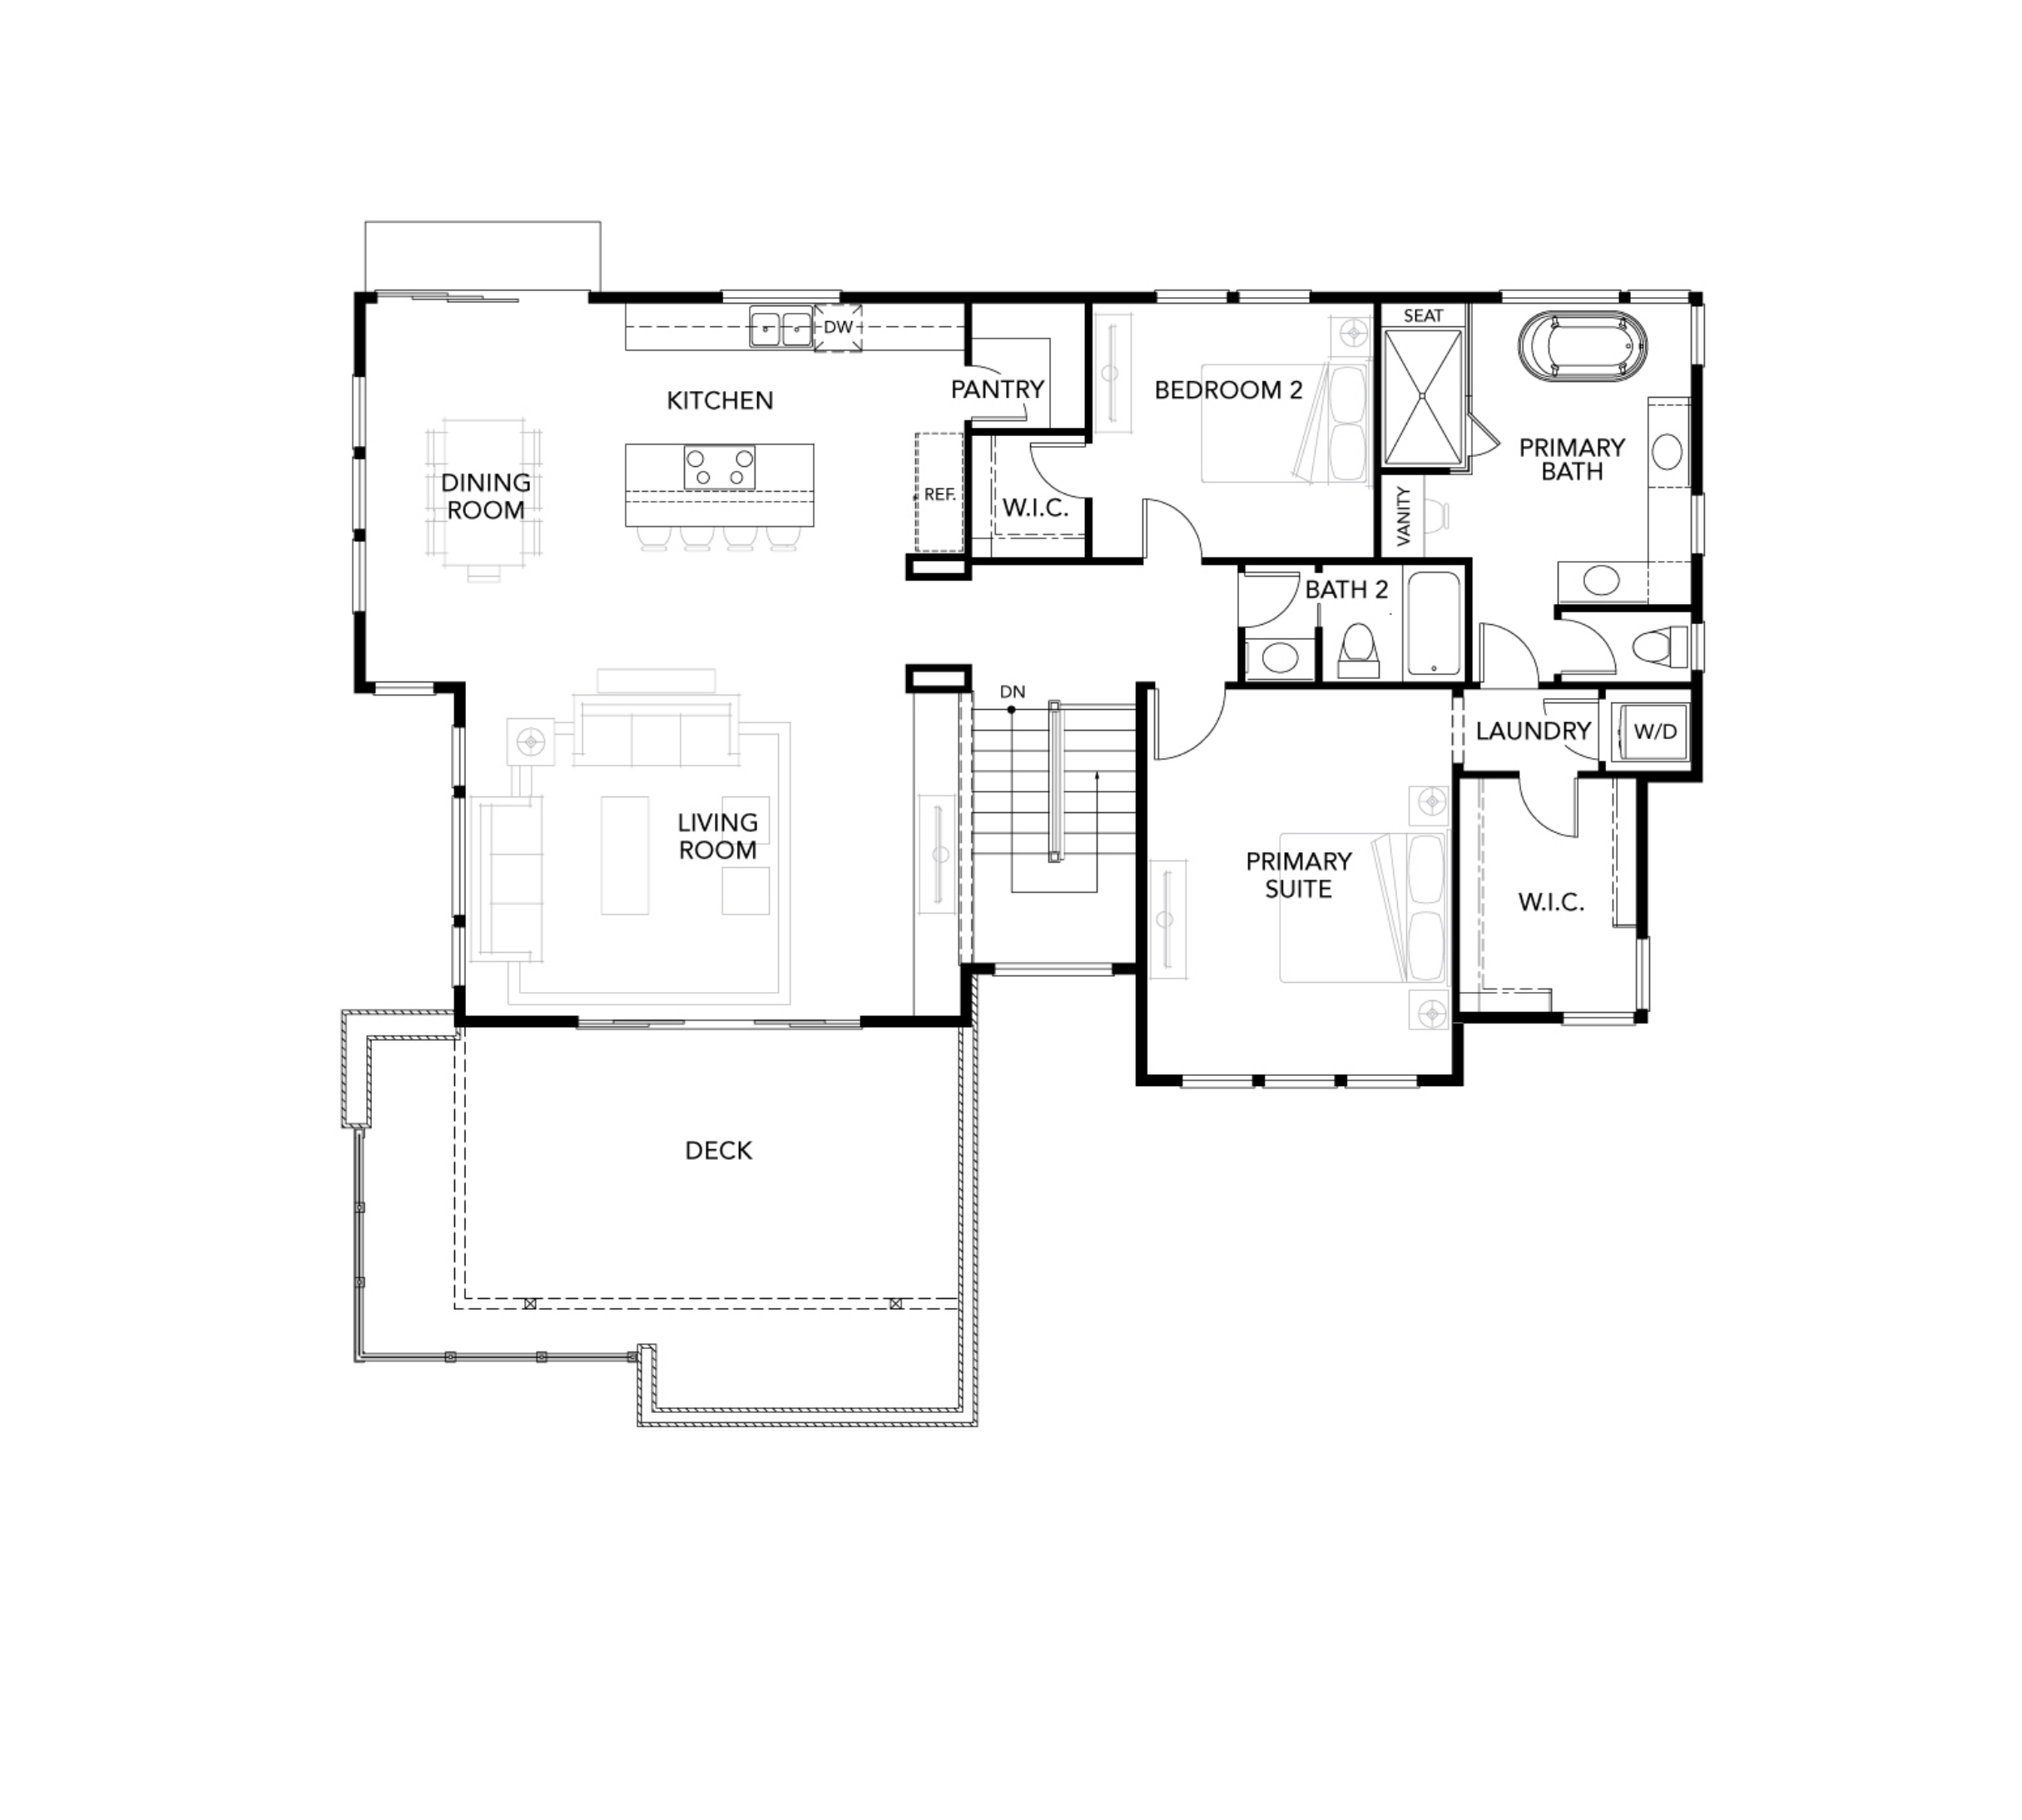 Haven Development's second floor Plan for elevation 1A of the Legacy at Lucas Valley new home development in Marin County, CA